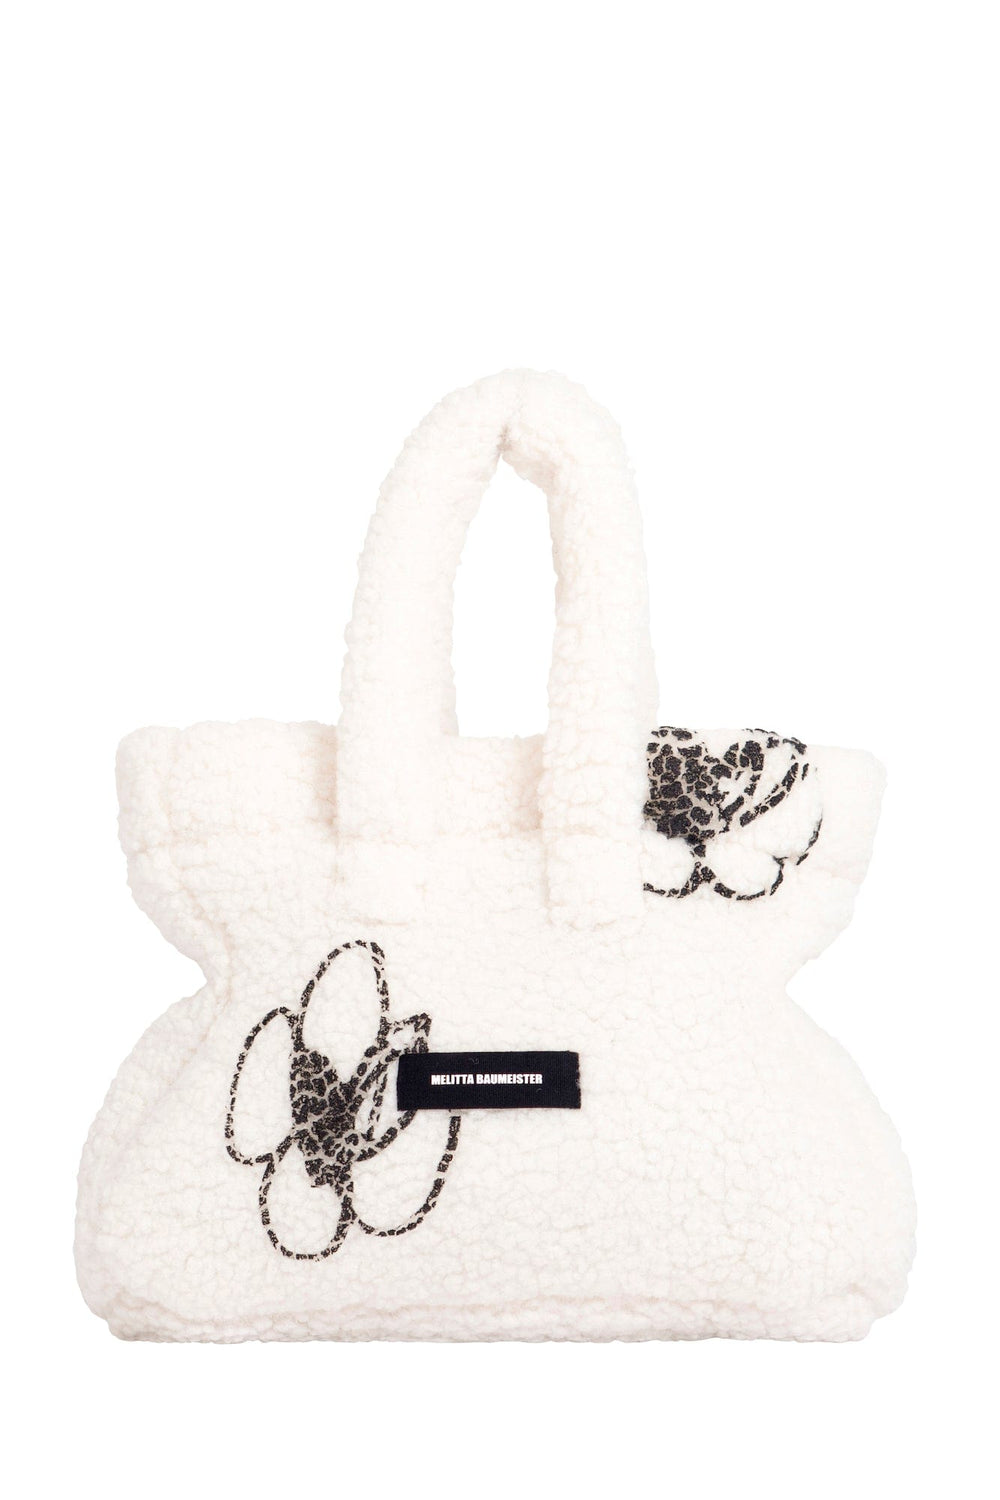 Melitta Baumeister Ivory Teddy Shopper Bag – Antidote Fashion and